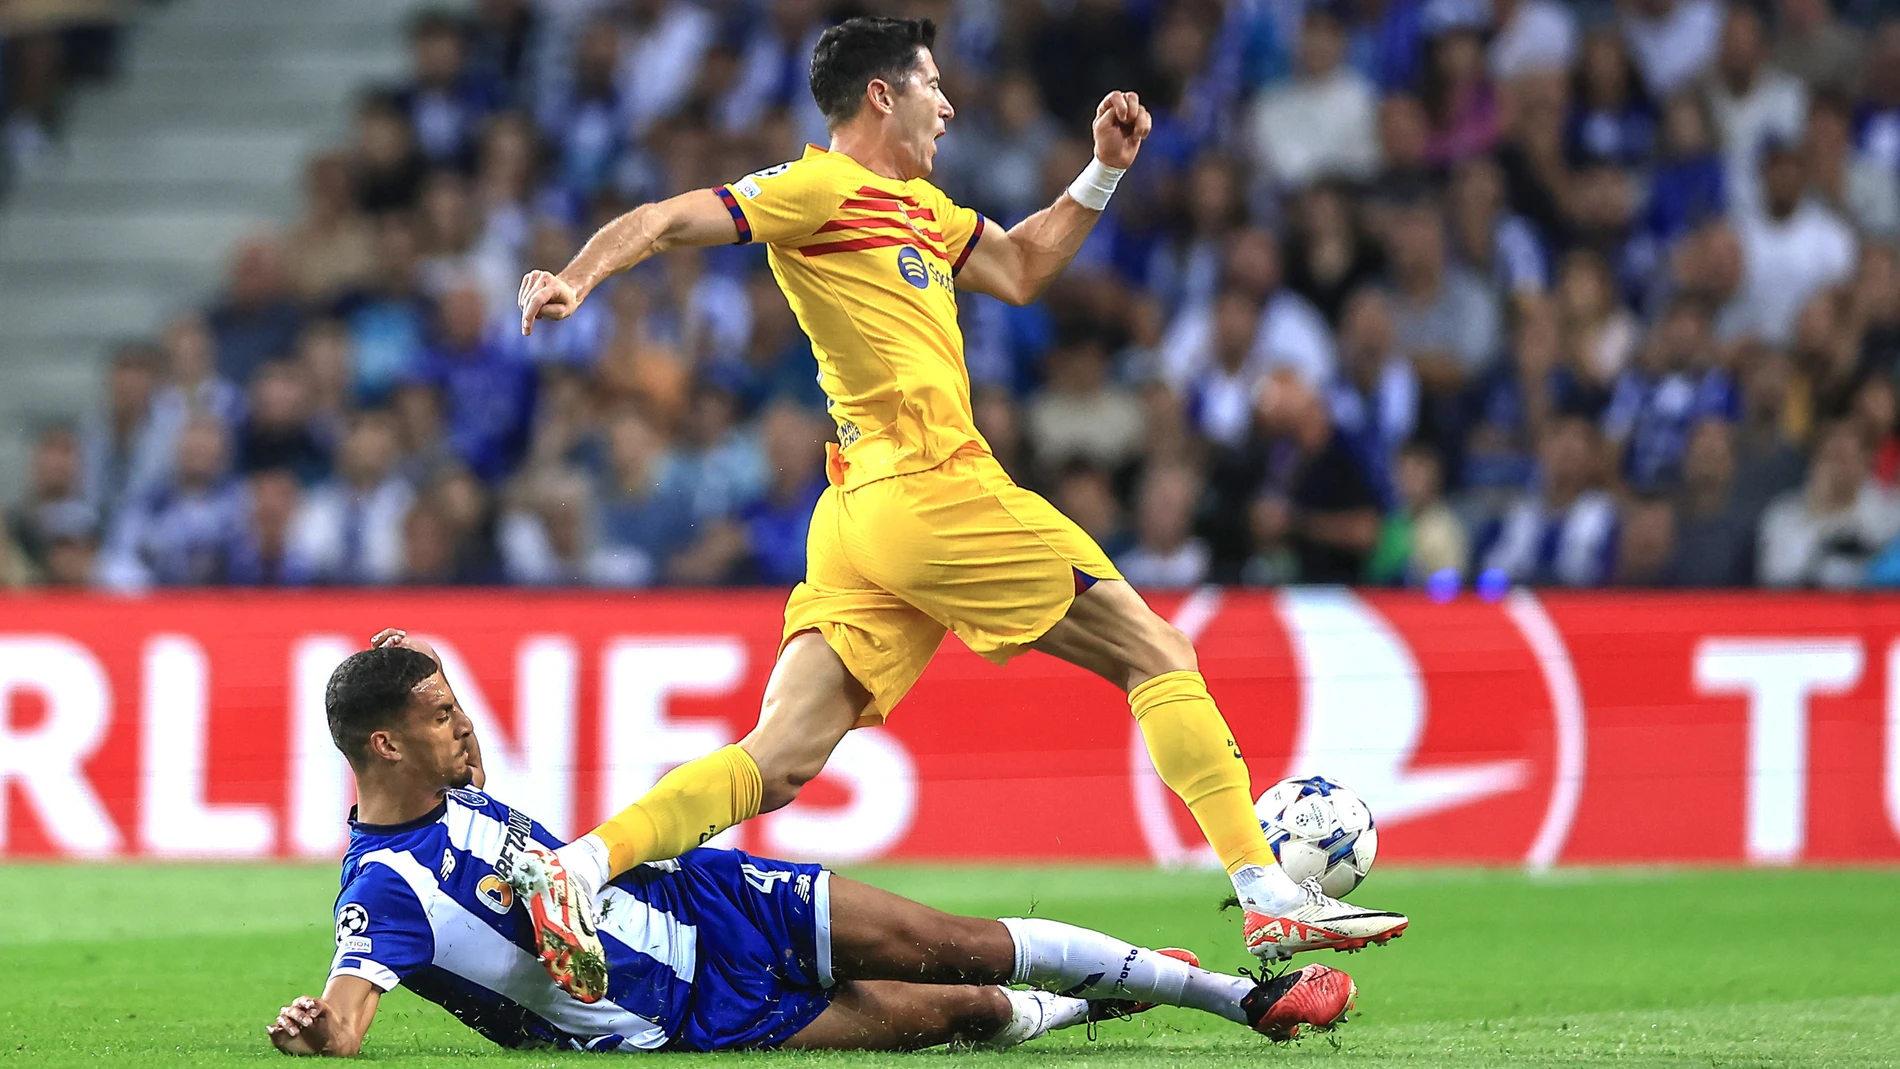 04 October 2023, Portugal, Porto: Porto's David Carmo (L) and Barcelona's Robert Lewandowski battle for the ball during the UEFA Champions League group H soccer match between FC Porto and FC Barcelona at Estadio do Dragao. Photo: Miguel Pereira/Atlantico Press via ZUMA Press/dpa Miguel Pereira/Atlantico Press V / Dpa 04/10/2023 ONLY FOR USE IN SPAIN